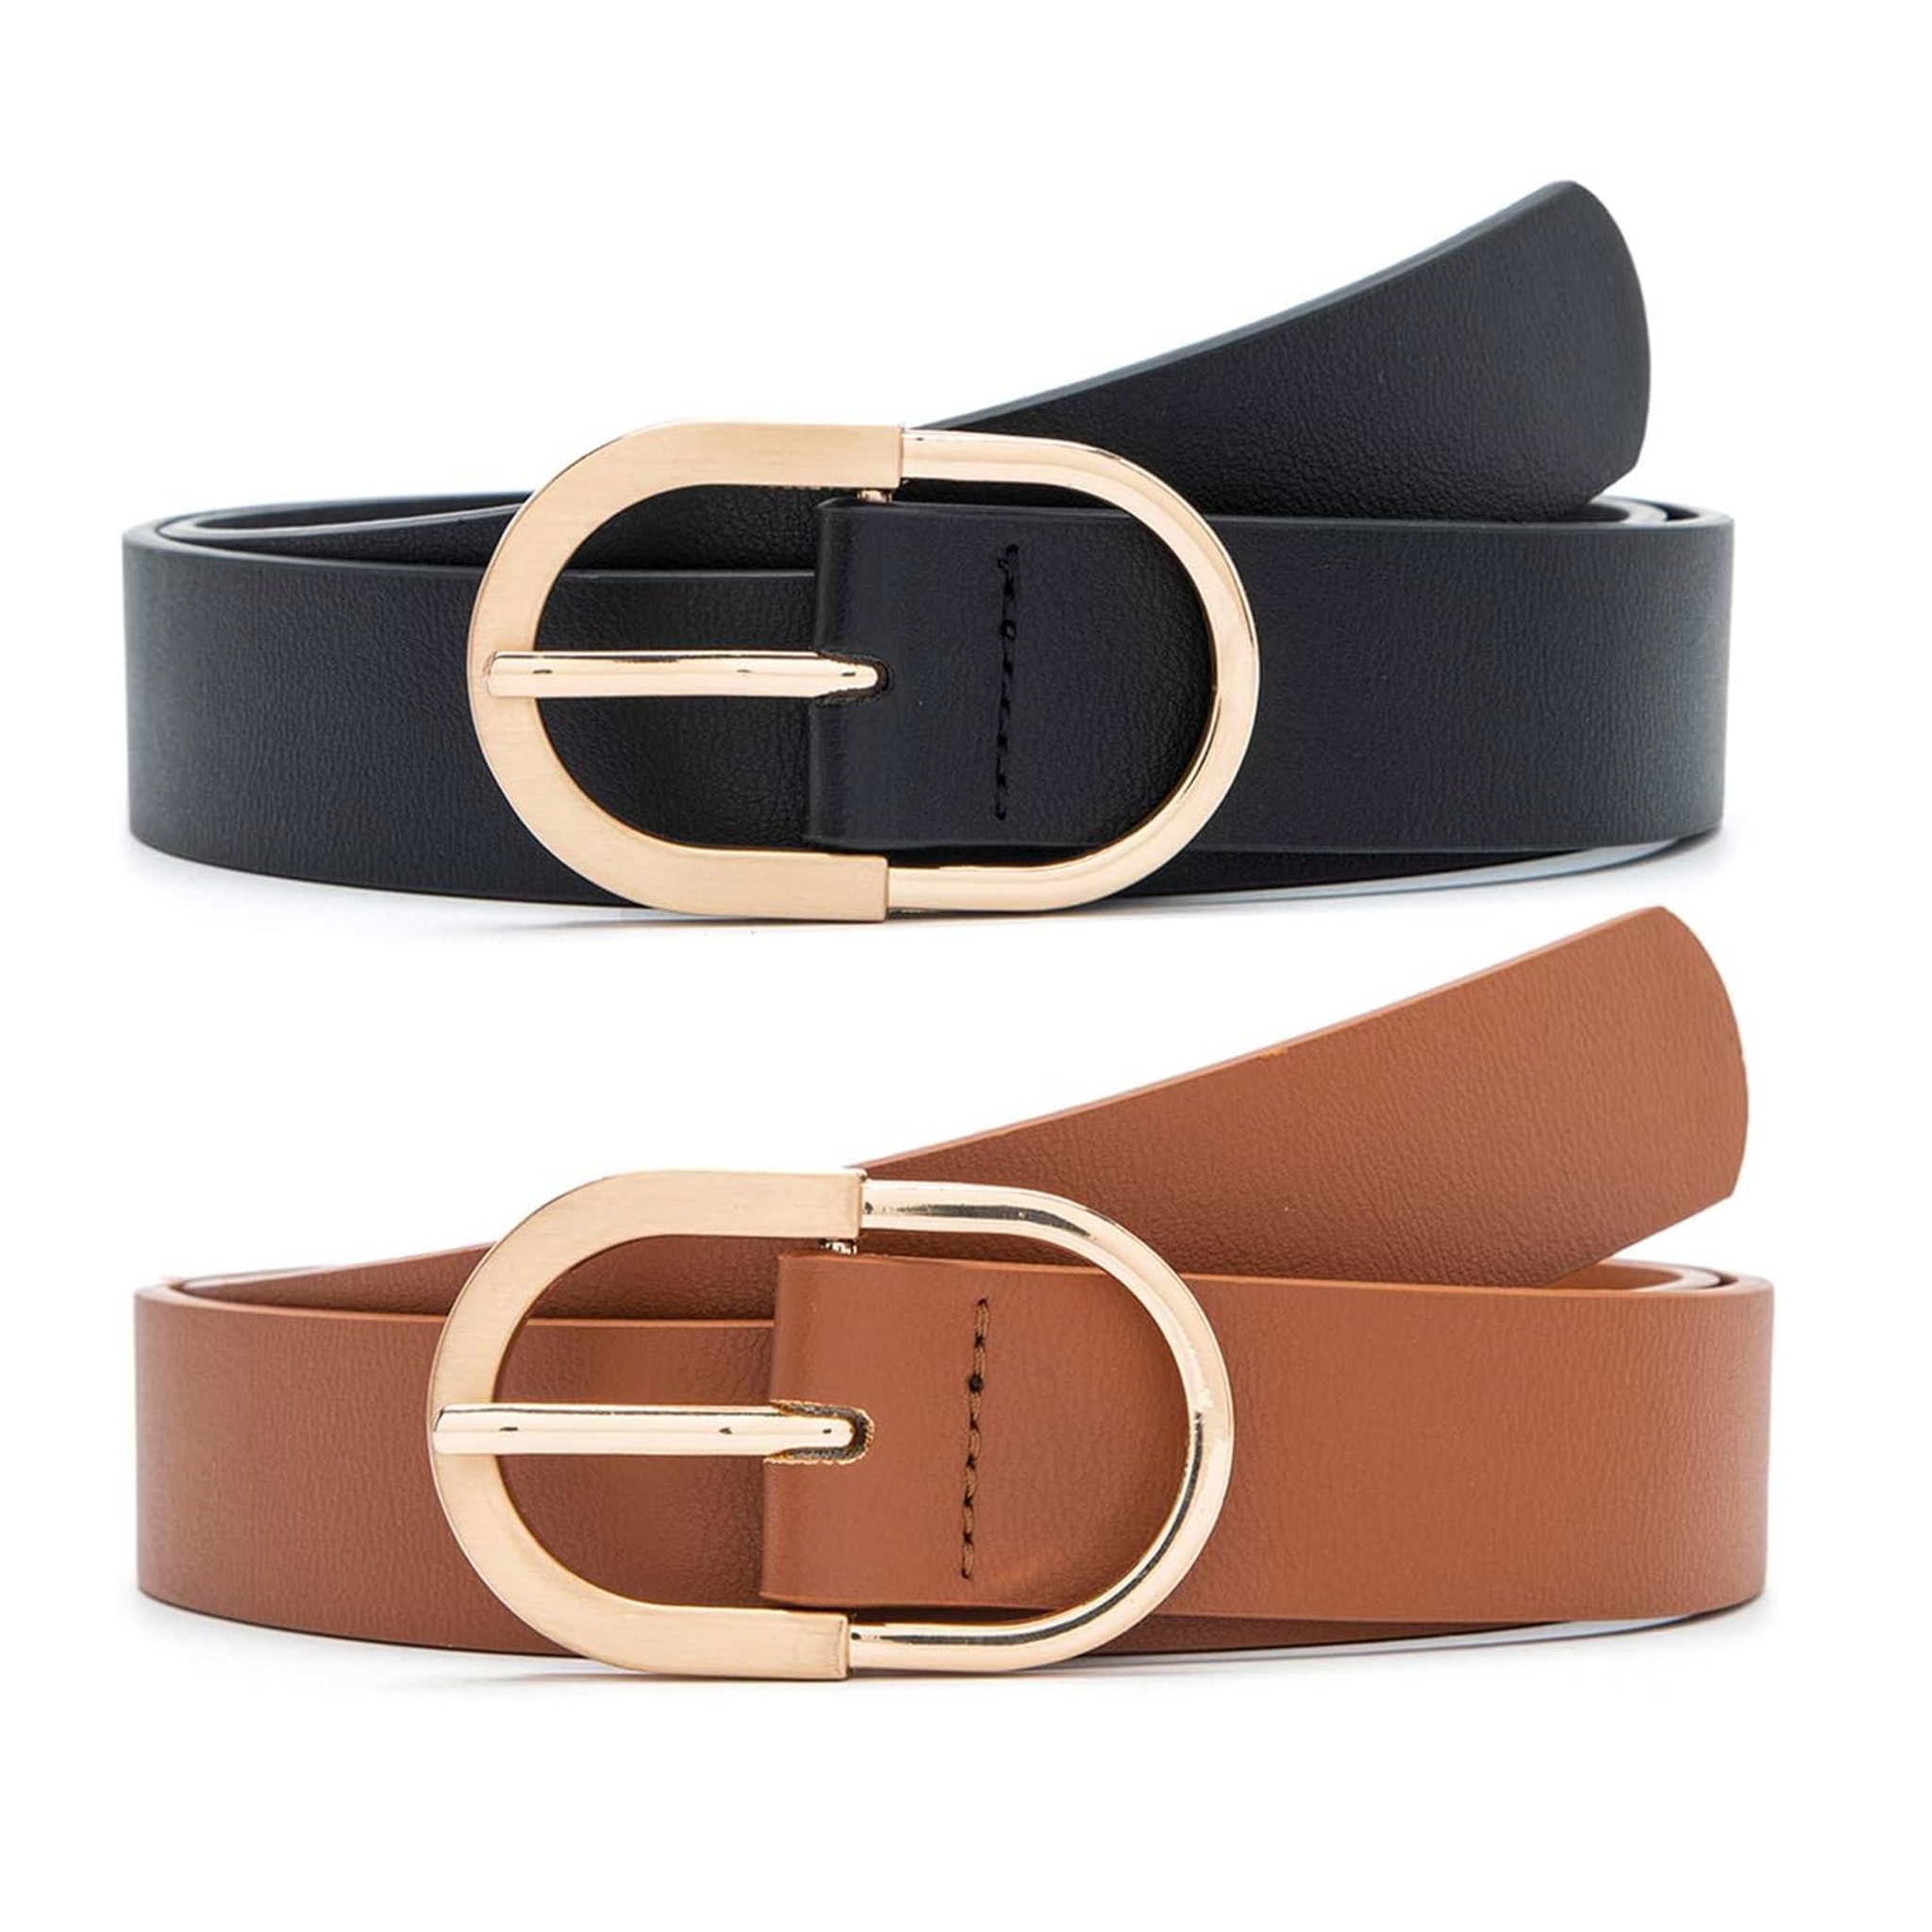 2-Pack Moreless Women's Leather Belts with Fashion Center Bar Buckle